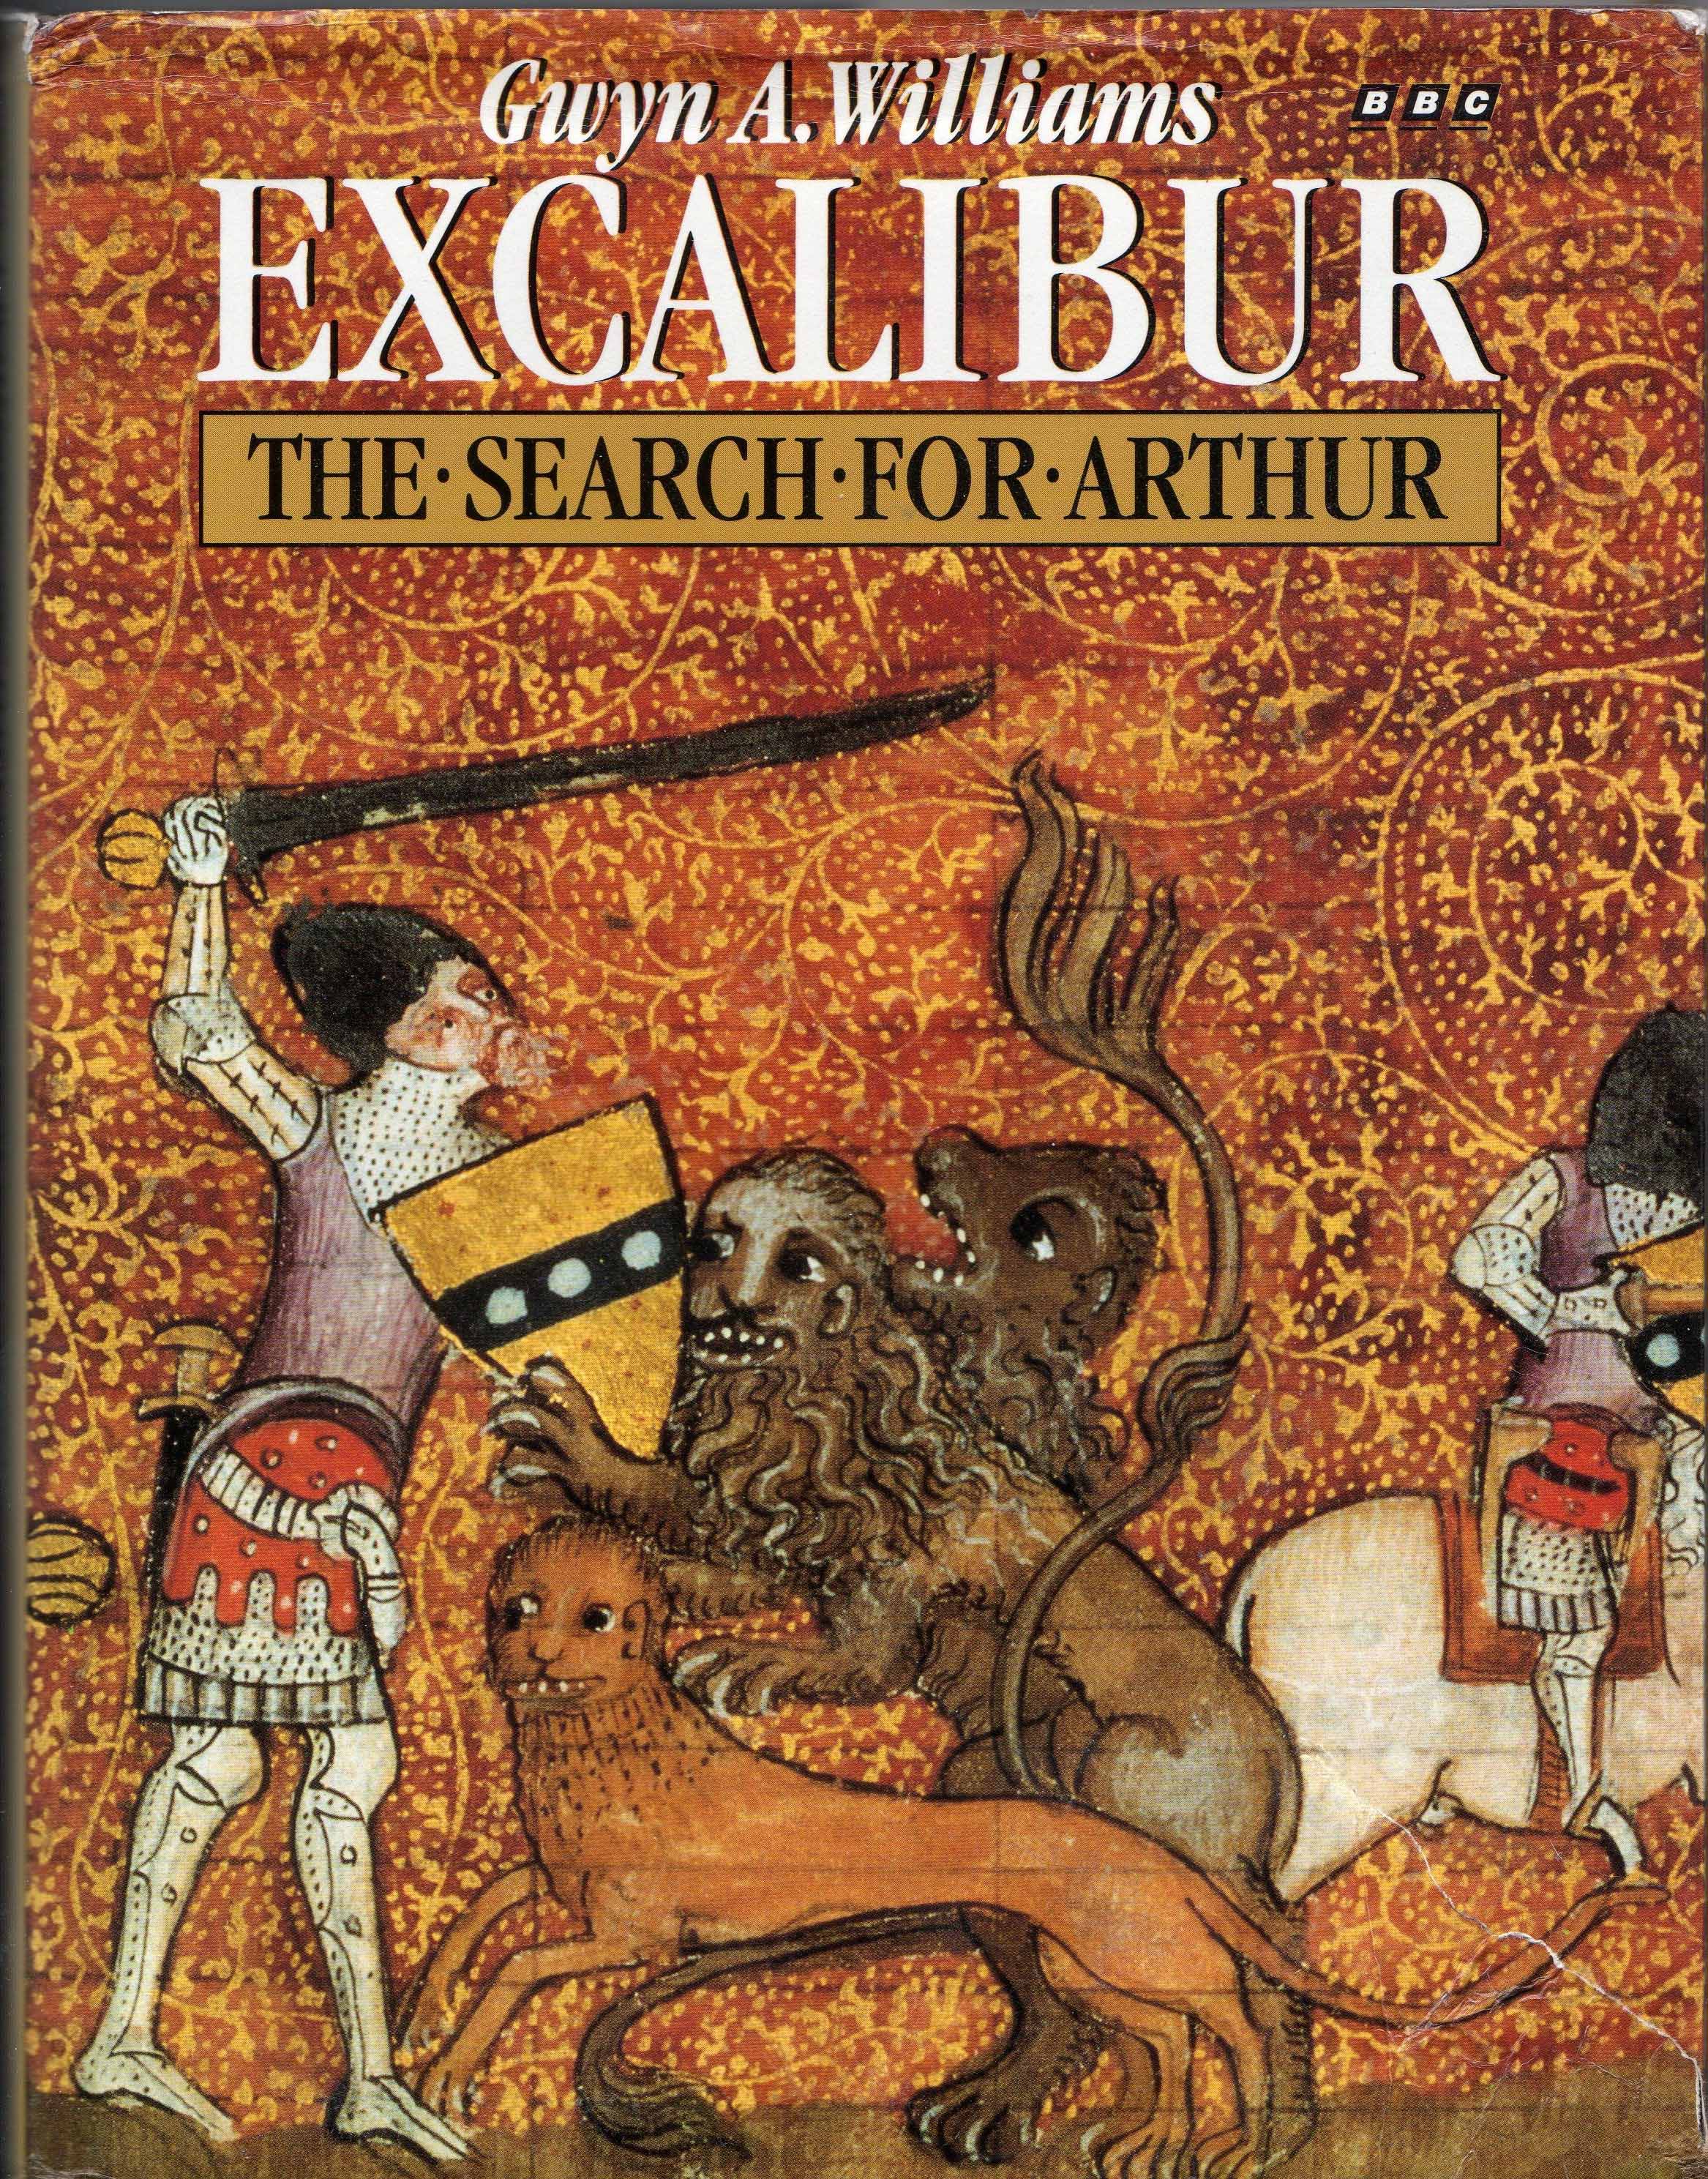 Excalibur: The Search for Arthur